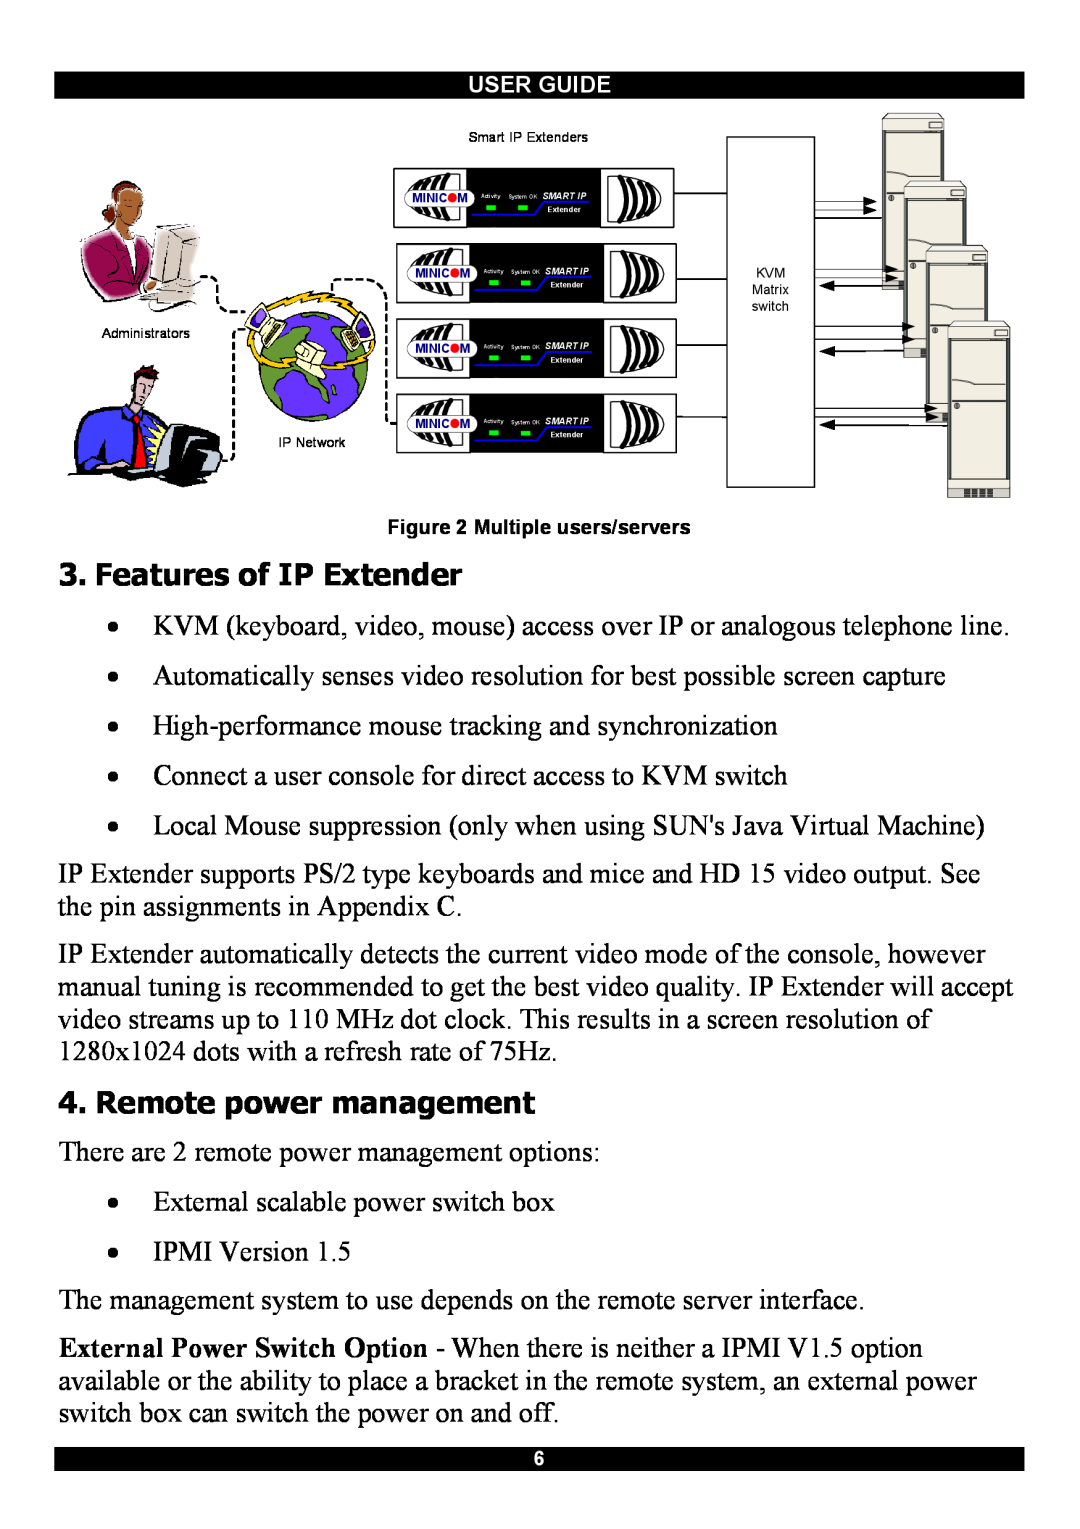 Minicom Advanced Systems Smart IP Extender manual Features of IP Extender, Remote power management 